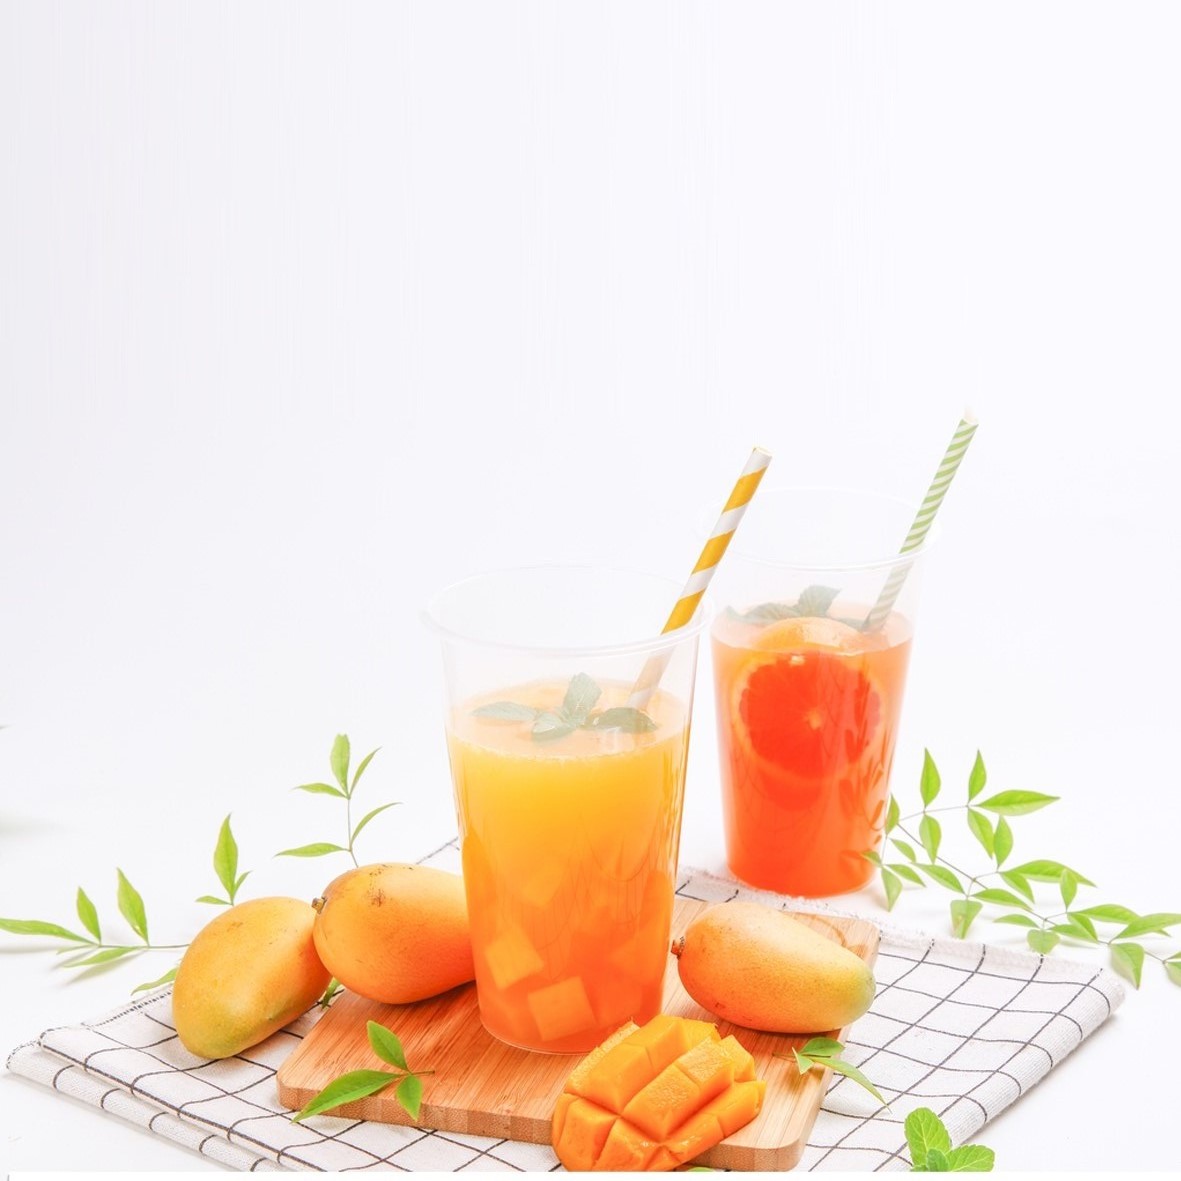 Process and advantages of mango processing line